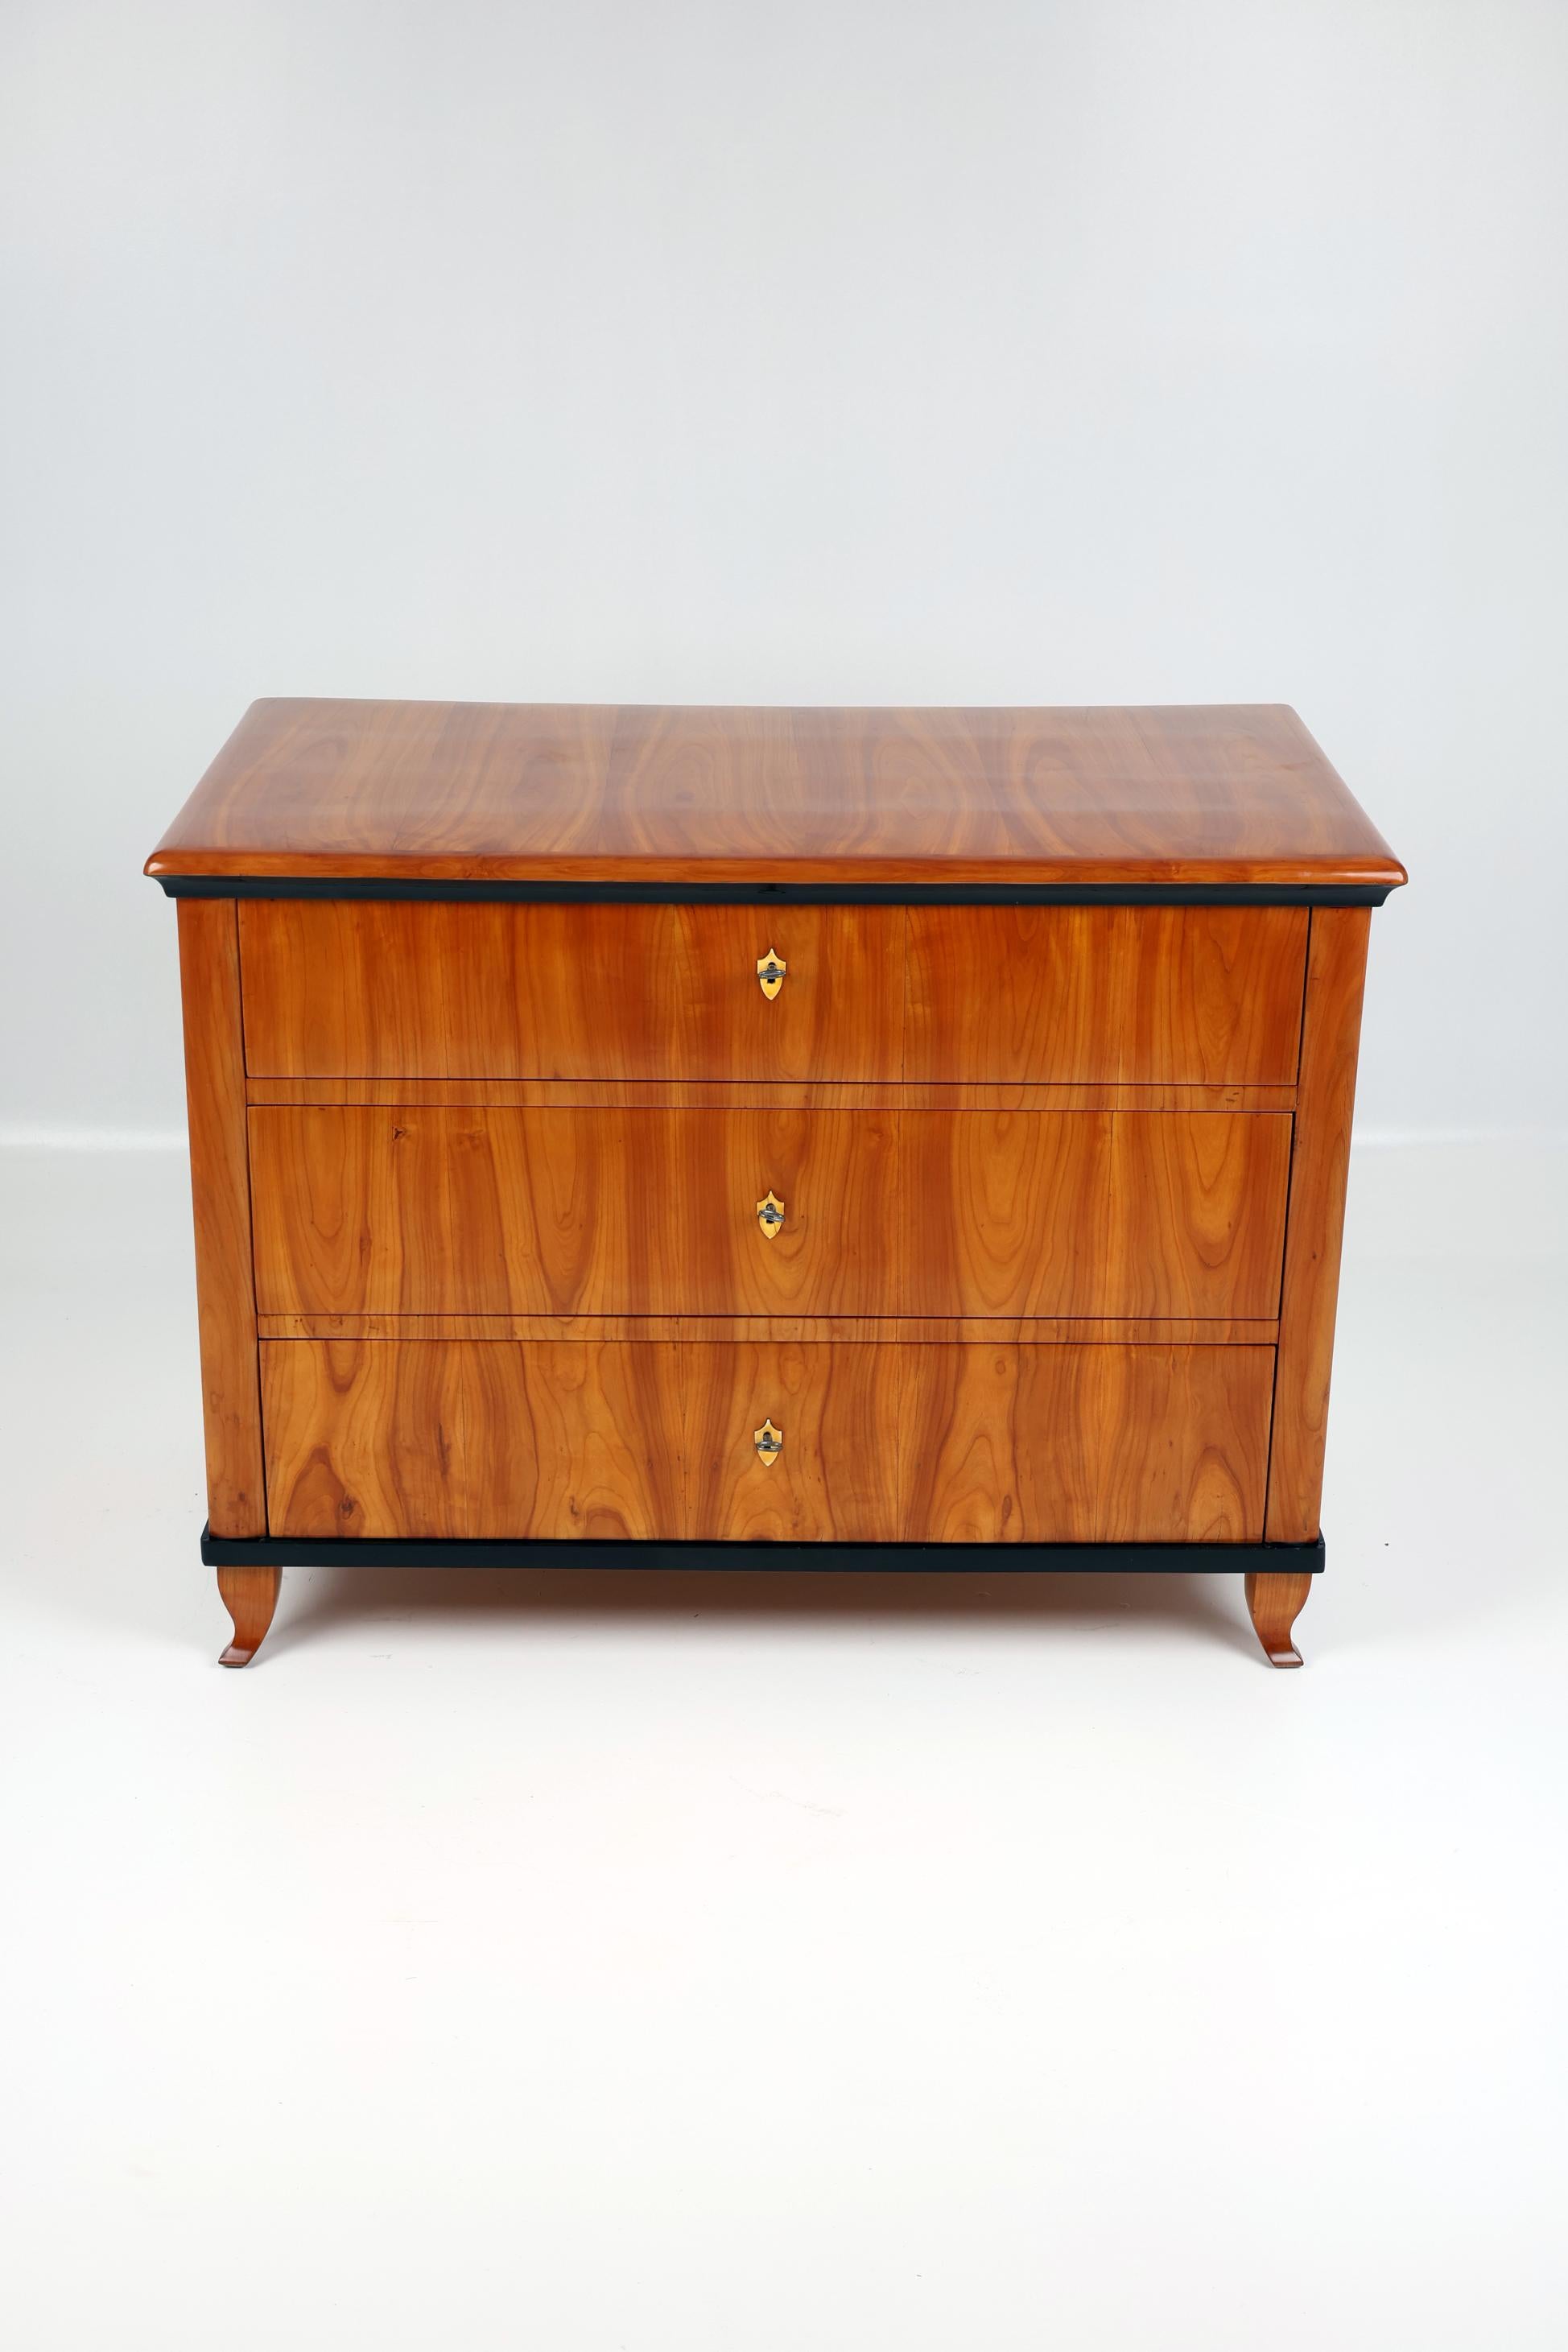 19th Century Biedermeier Chest of Drawers,
Germany, 1830
Cherry Wood 

This Biedermeier chest of drawers in cherrywood dates from 1830. With a length of 60 cm, a width of 107 cm and a height of 80 cm, it offers plenty of space for clothing and